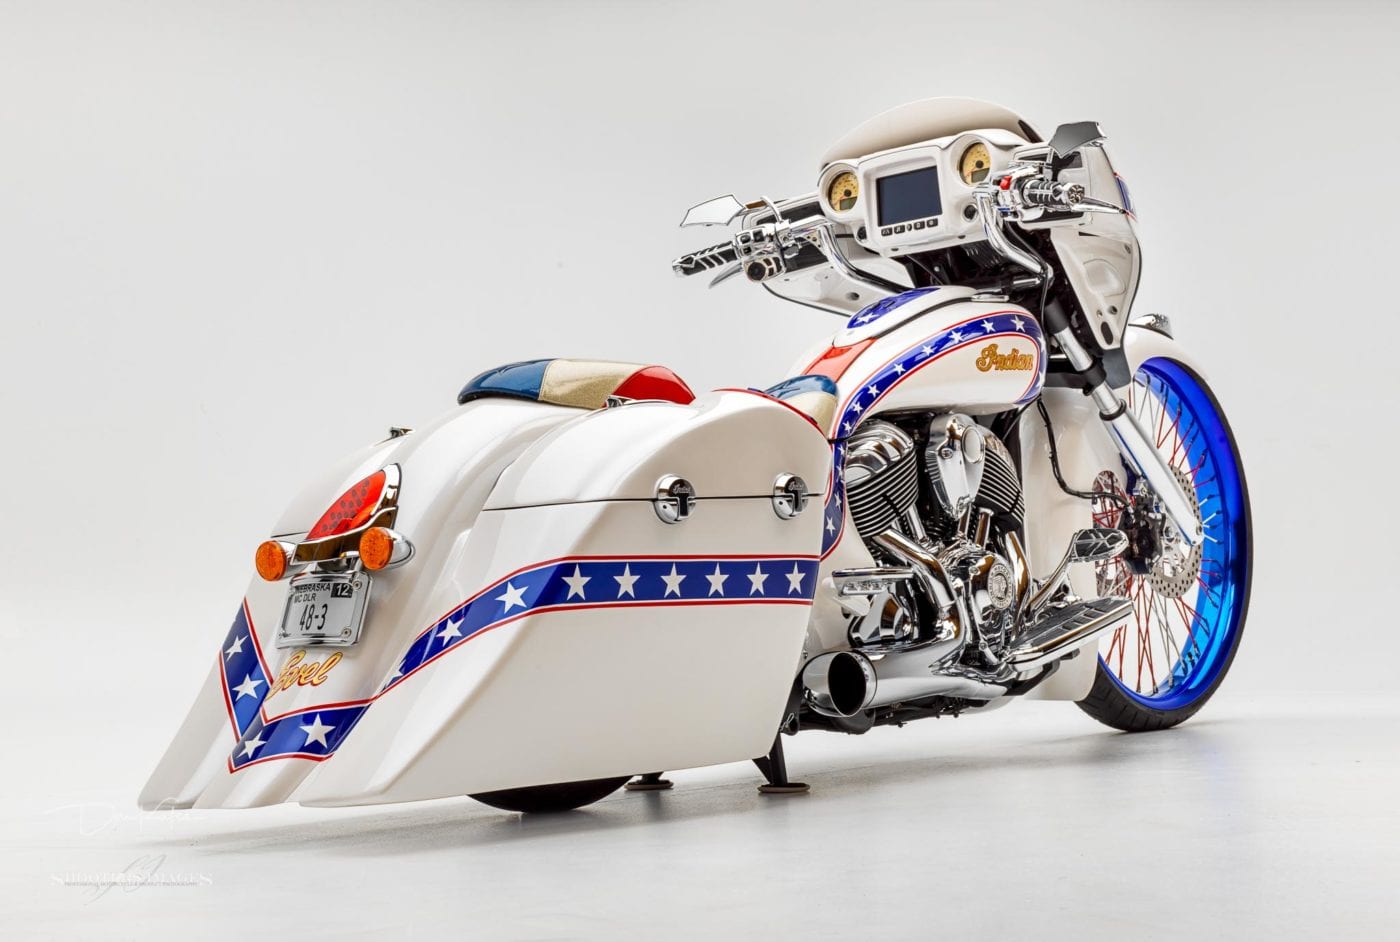 Indian Chieftain Motorcycle Inspired By Travis Pastrana Evel Knievel